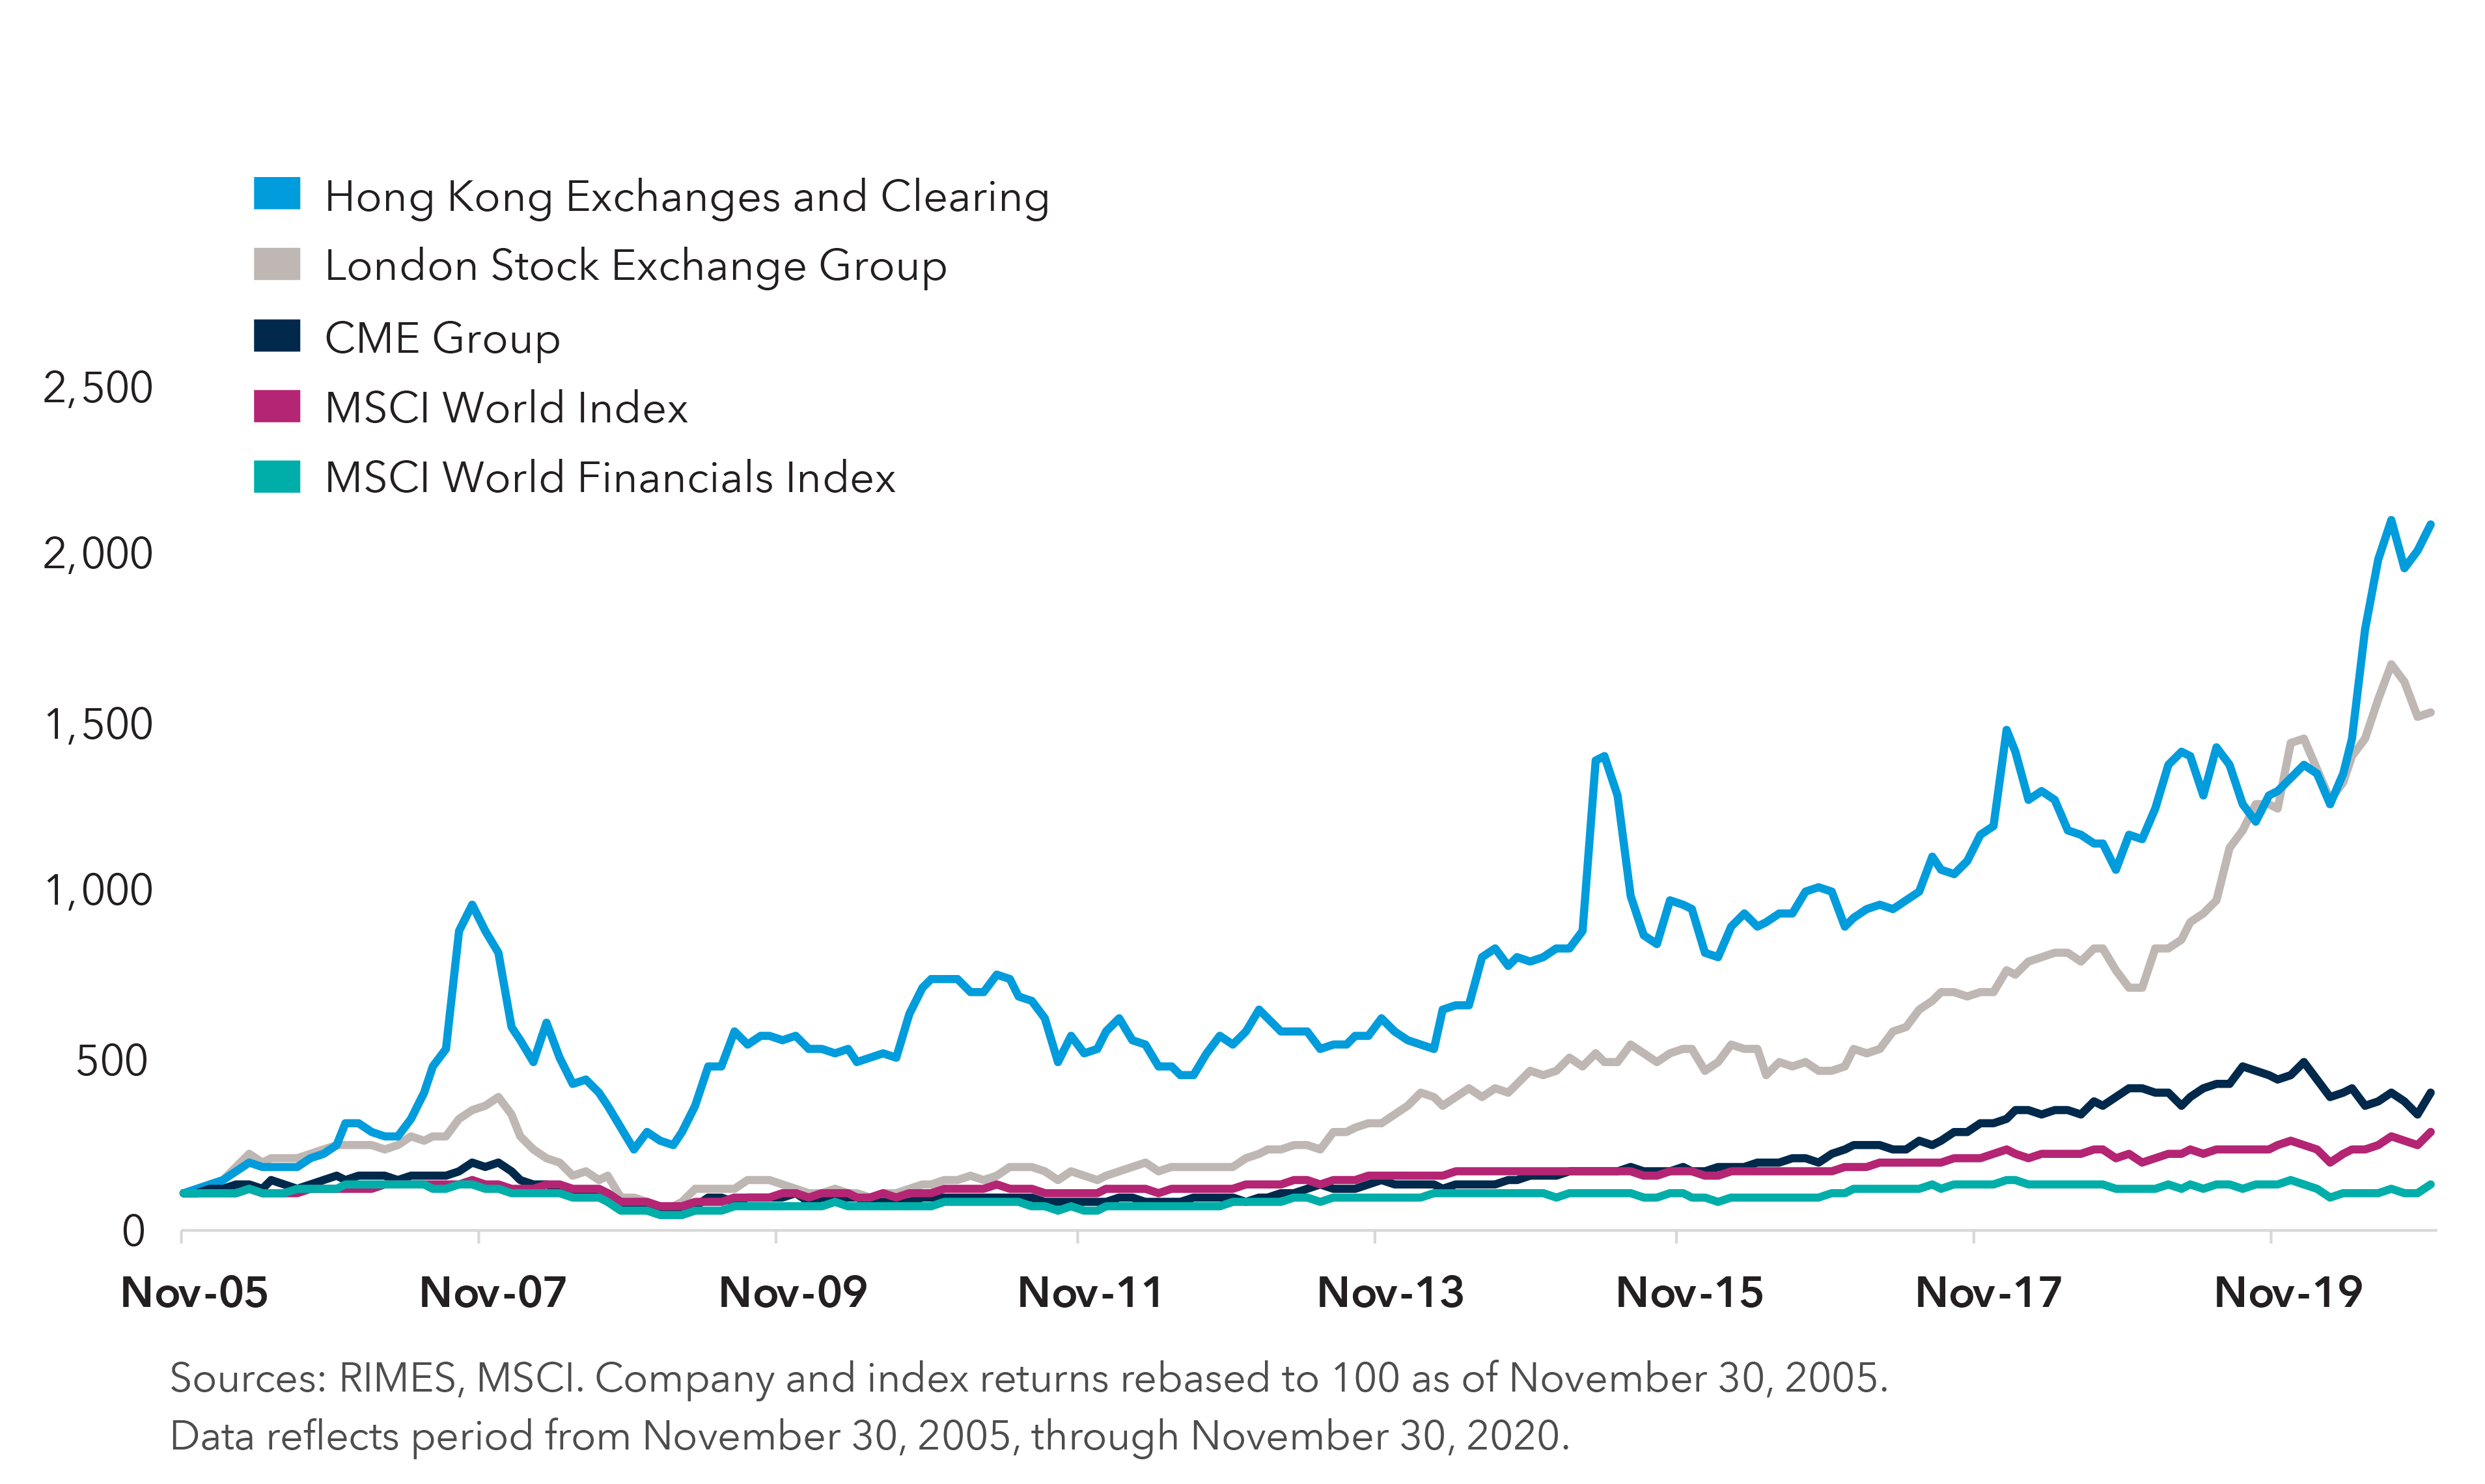 Chart compares index price returns of the Hong Kong Exchanges and Clearing, London Stock Exchange Group and CME Group versus the MSCI World Index and the MSCI World Financials Index. Returns were rebased to 100. From November 30, 2005, through November 30, 2020, the Hong Kong Exchanges and Clearing rose in value to approximately 2,090, London Stock Exchange Group to 1,531 and CME Group to 399. By comparison, the MSCI World Index climbed in value to 283 and the MSCI World Financials Index was 131. Sources: RIMES, MSCI.